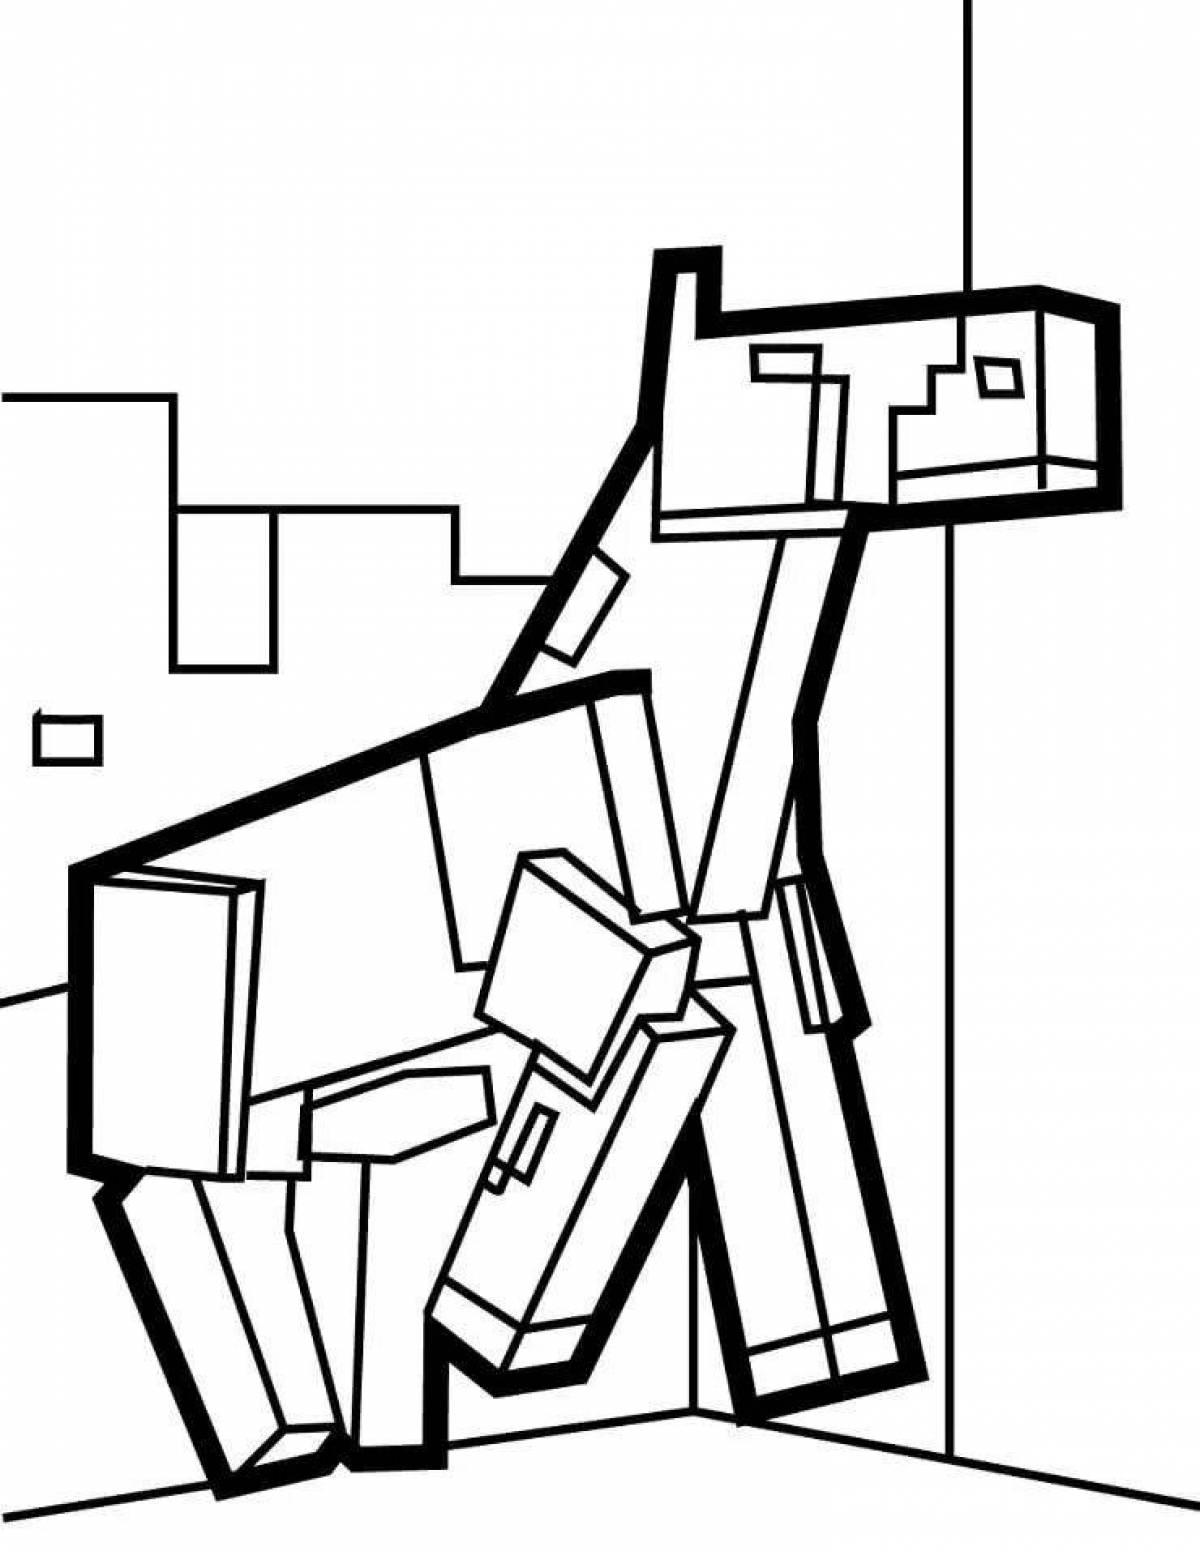 Creative minecraft horse coloring page